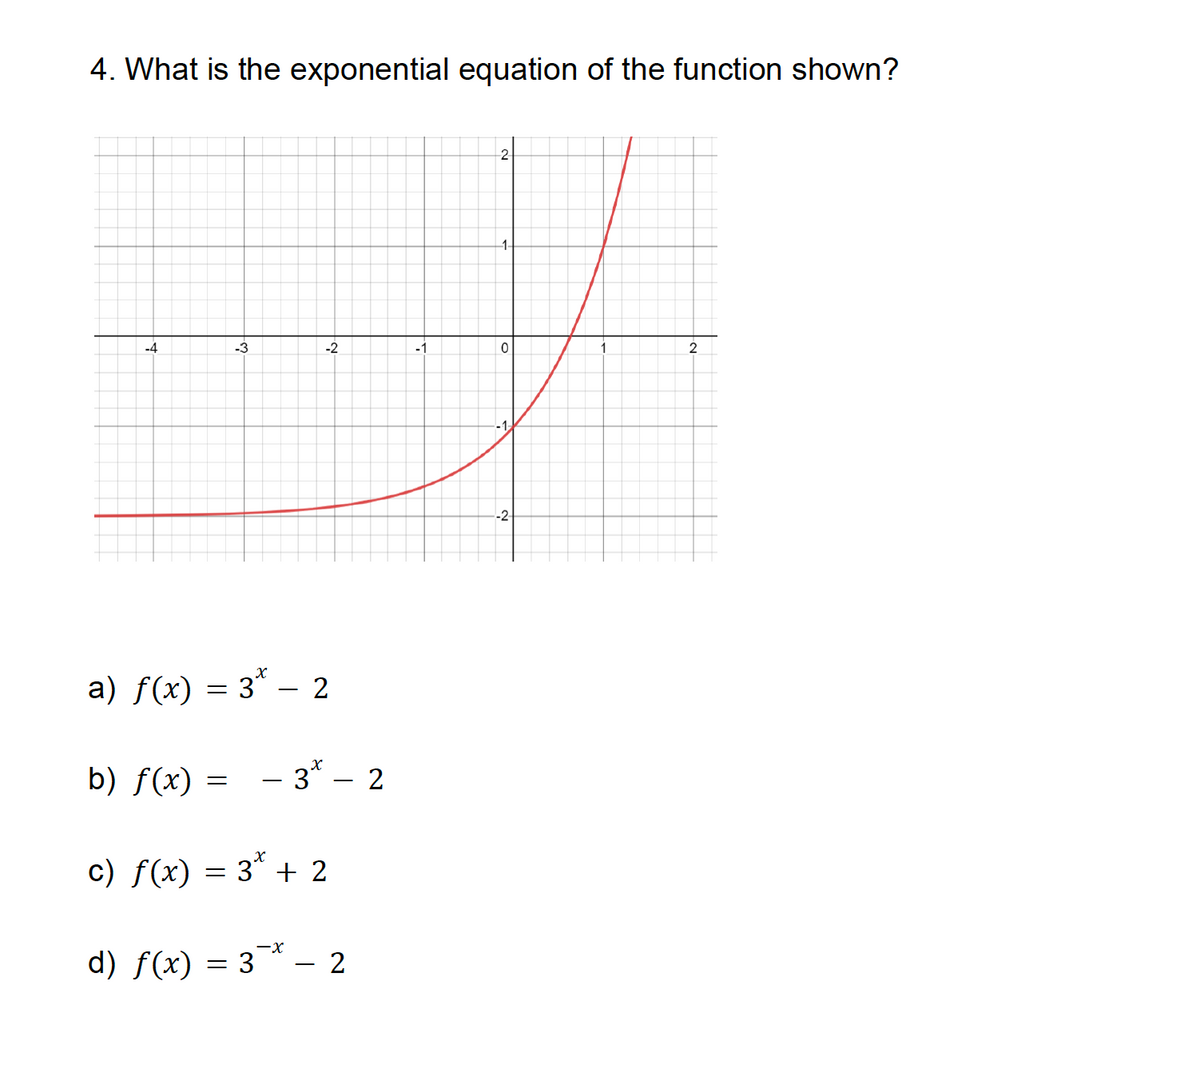 4. What is the exponential equation of the function shown?
-4
-3
-2
a) ƒ(x) = 3ª − 2
b) f(x)=3* - 2
c) f(x) = 3* + 2
-X
d) ƒ(x) = 3¯ª - 2
-1
2
-1.
0
-1.
-2-
2